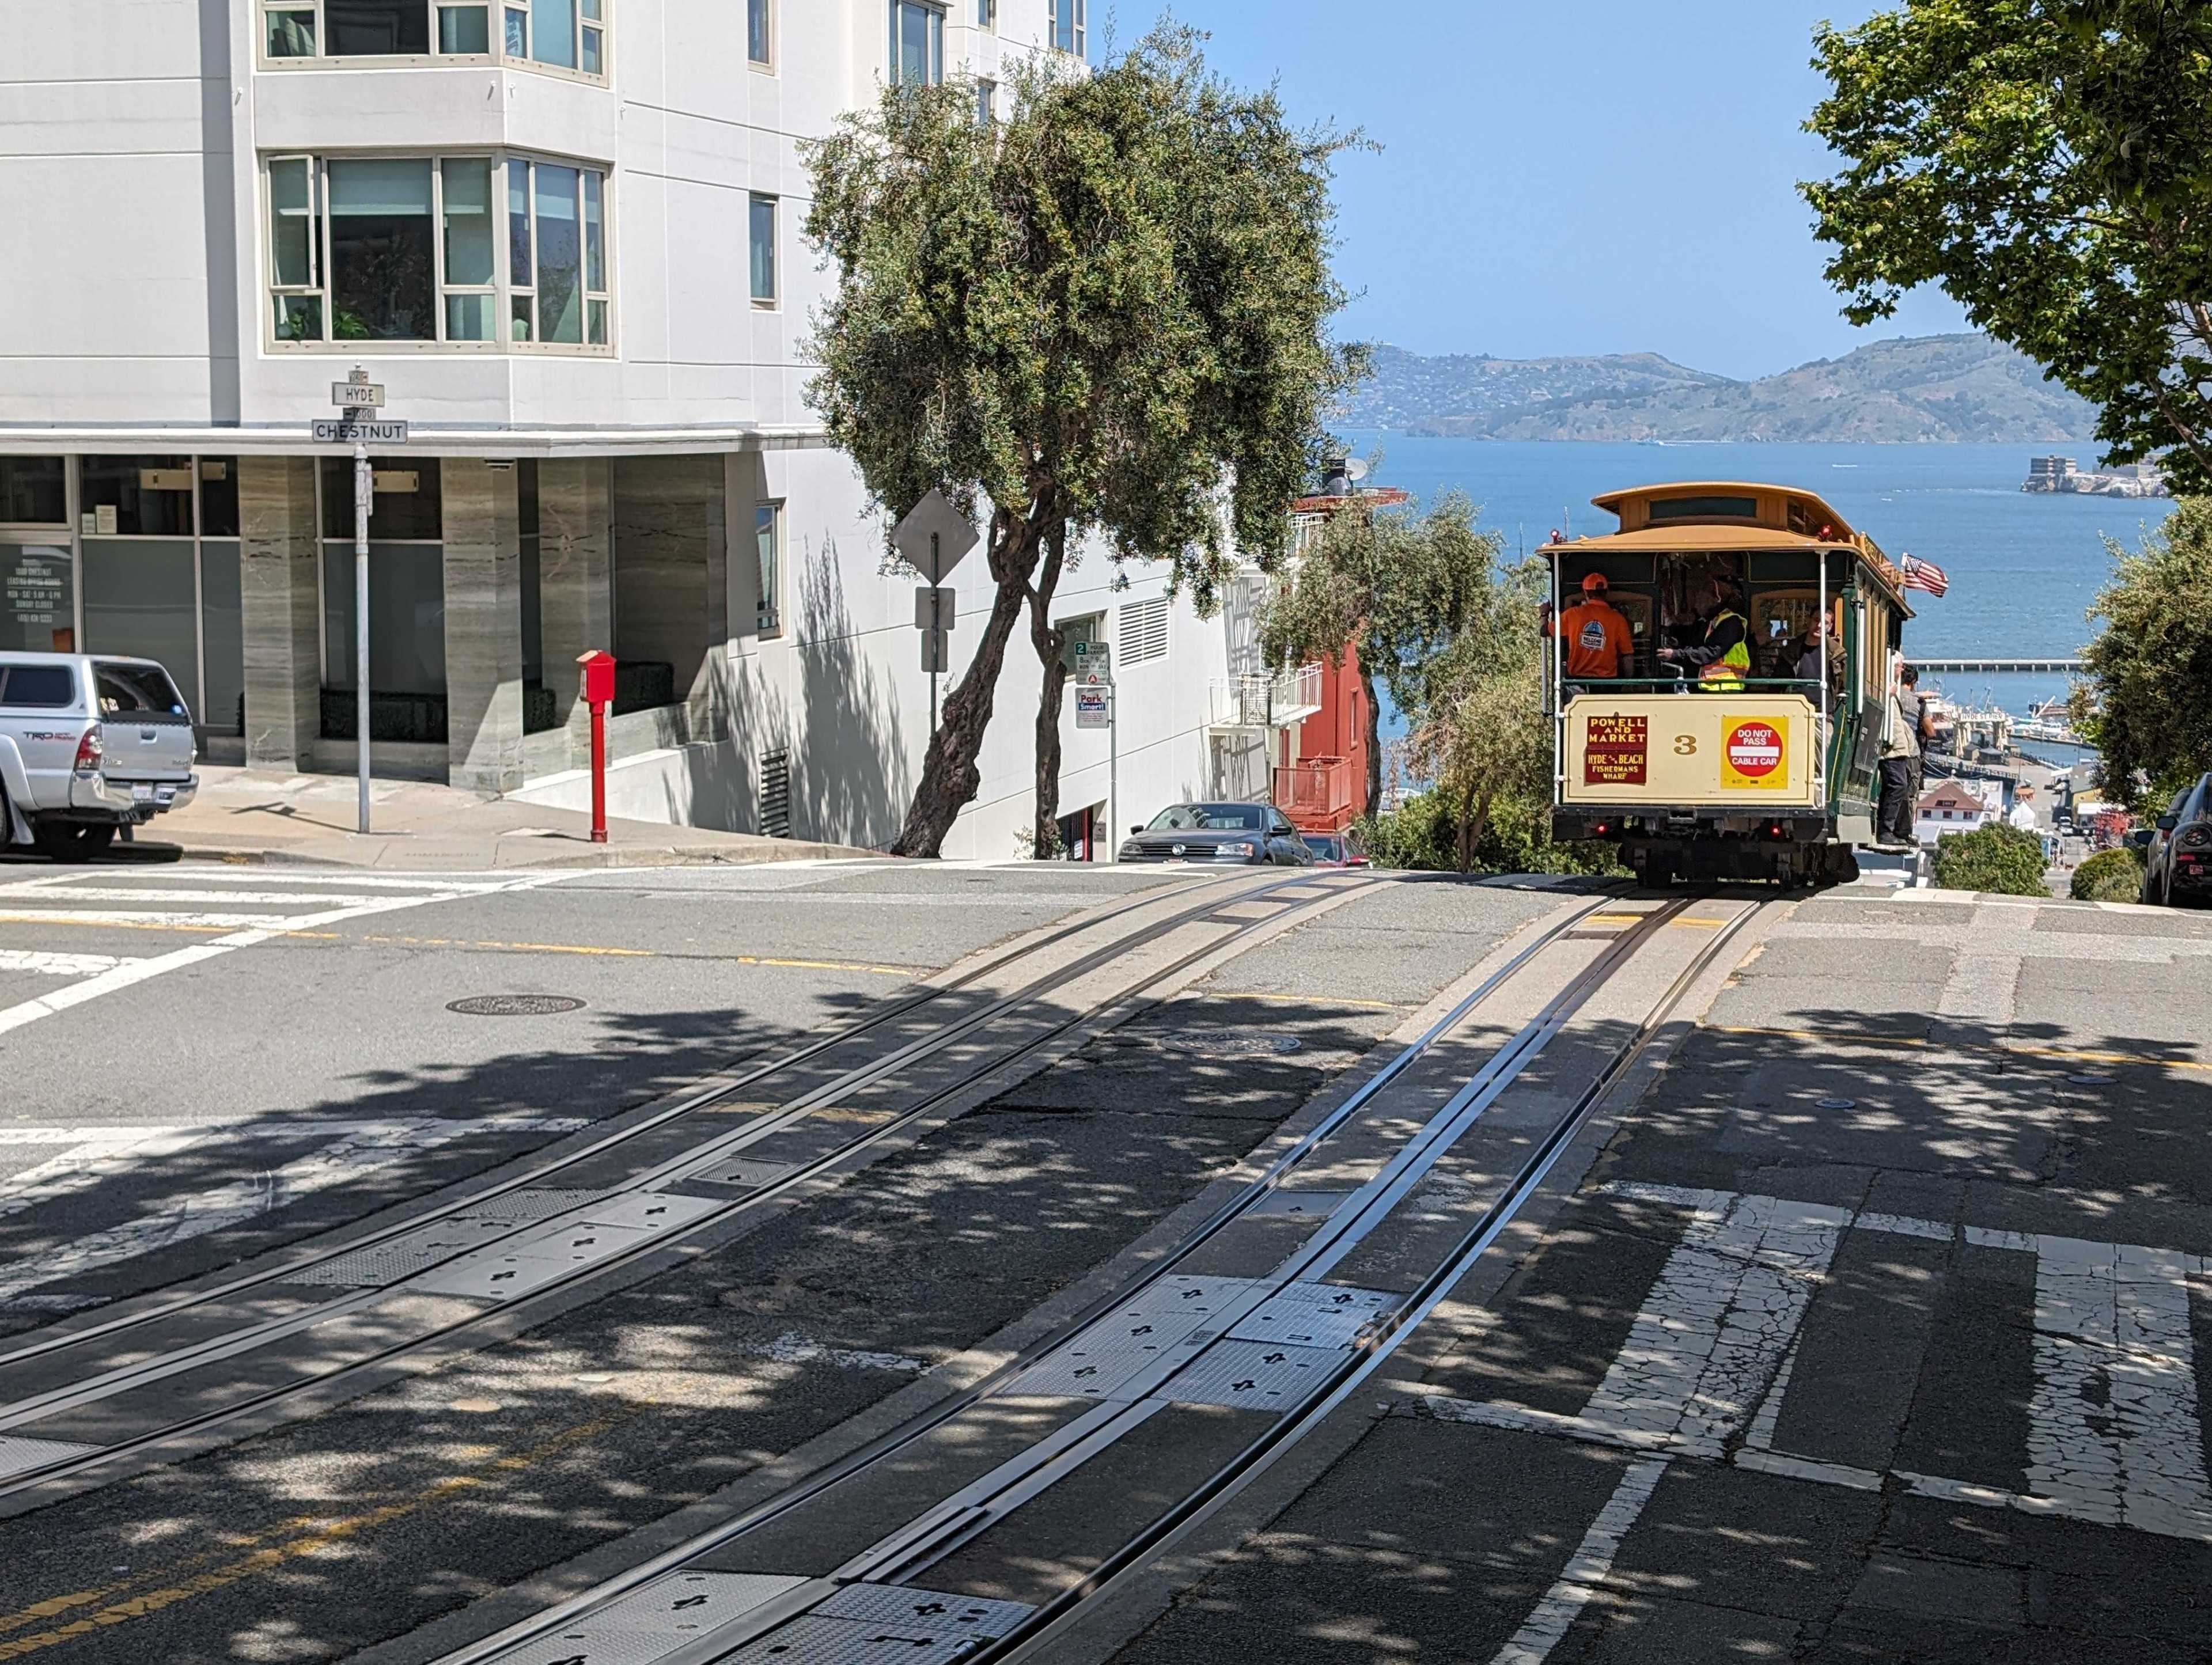 A cable car rides along a hilly street